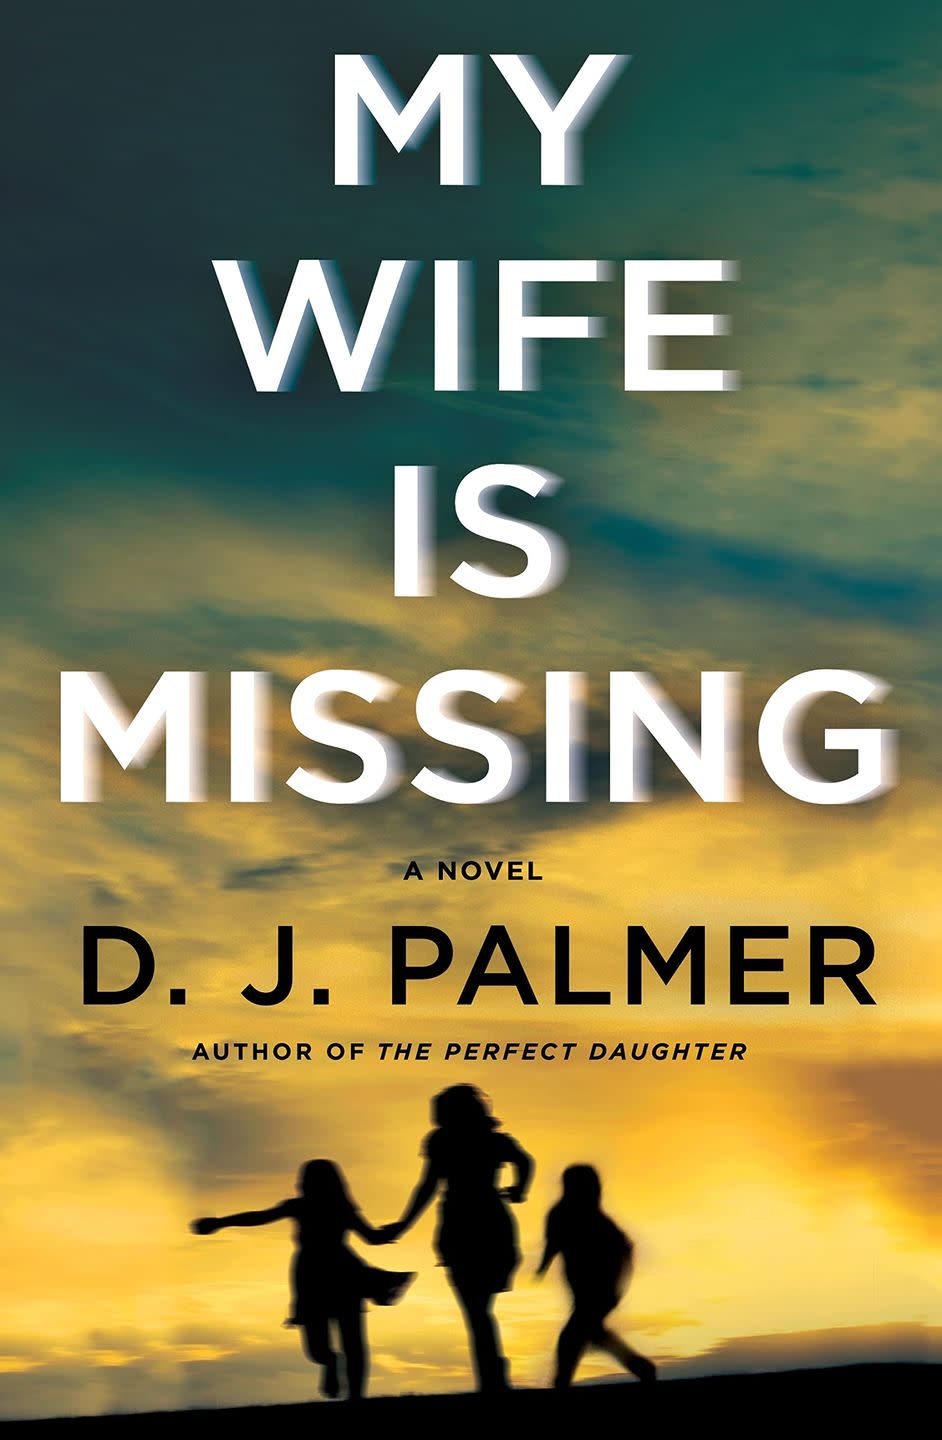 'My Wife is Missing' by D.J. Palmer